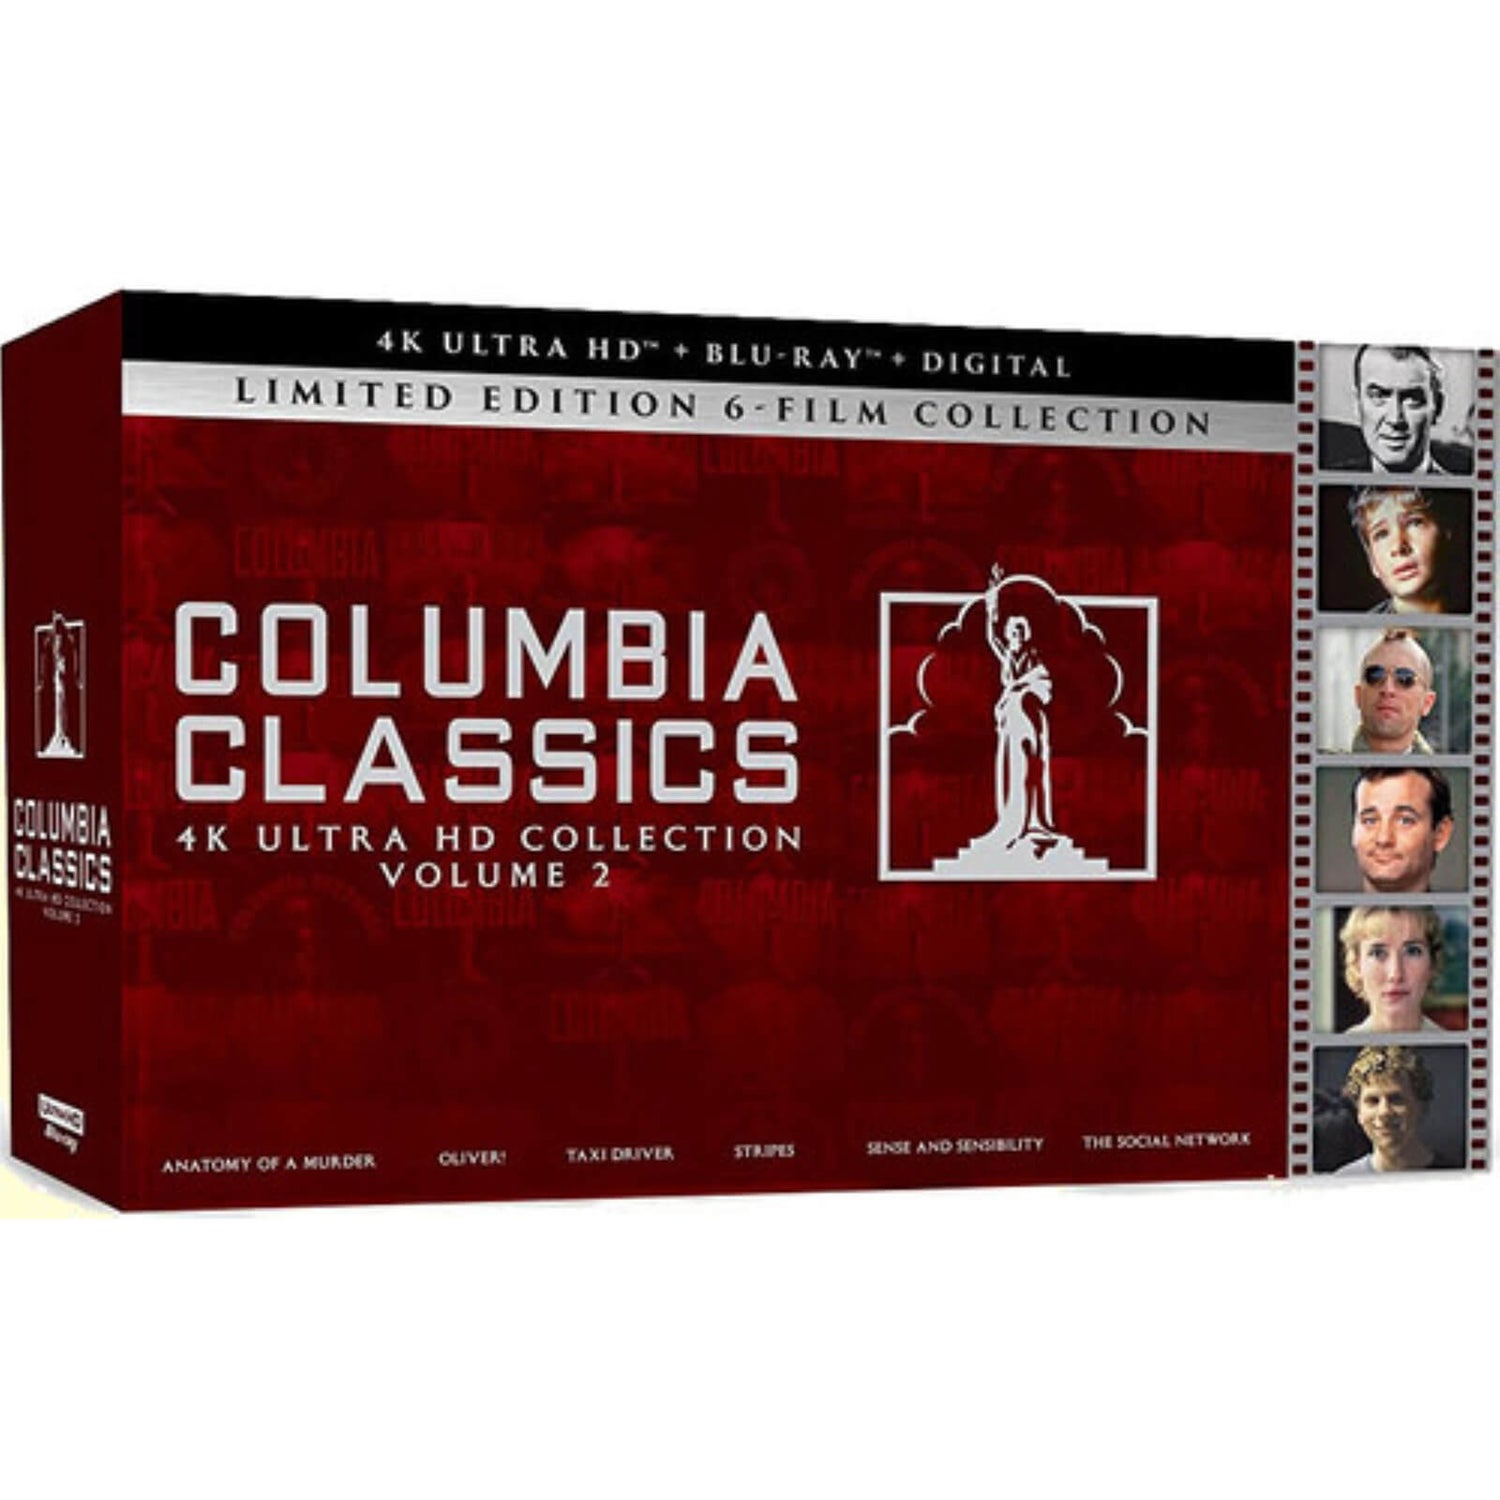 Columbia Classics: 4K Ultra HD Collection Volume 2 (Includes Blu-ray)